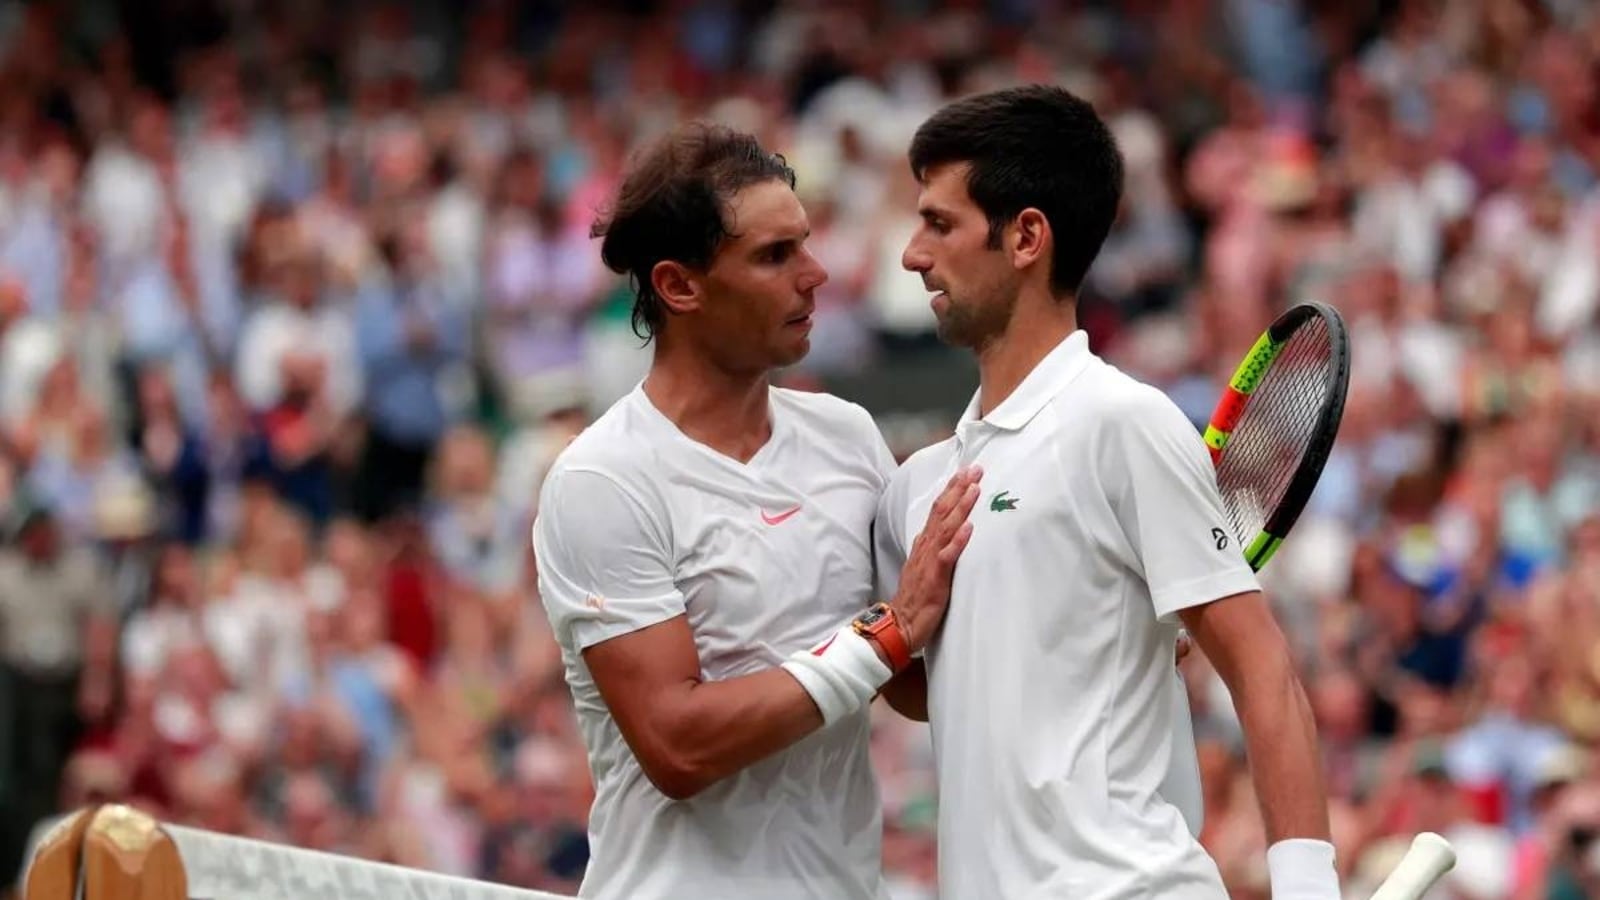 Hurlingham Classic: Matches, Time, Streaming details – All you need to know about Nadal, Djokovic’s pre-Wimbledon event